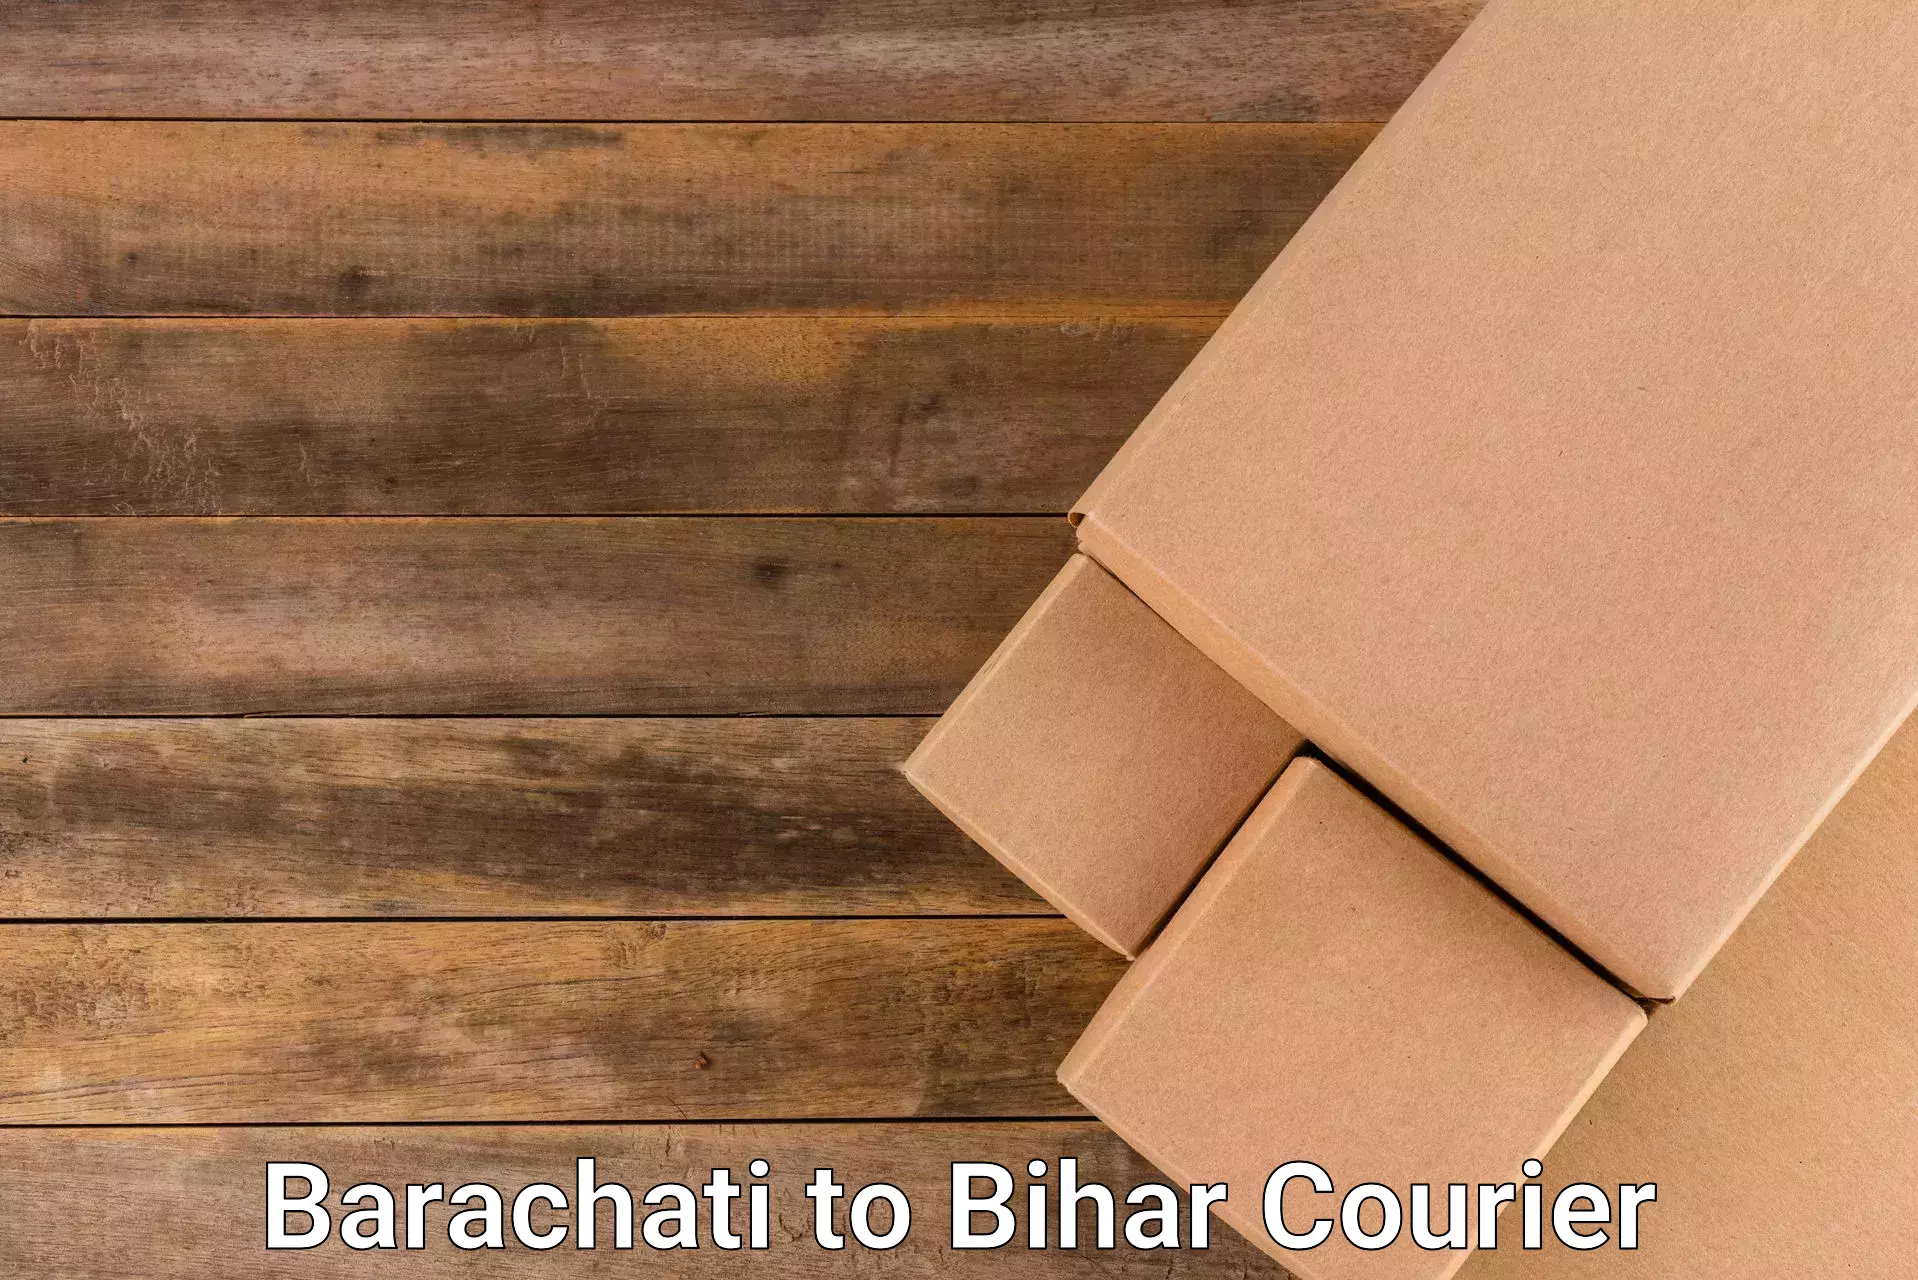 Courier service partnerships Barachati to Parsauni